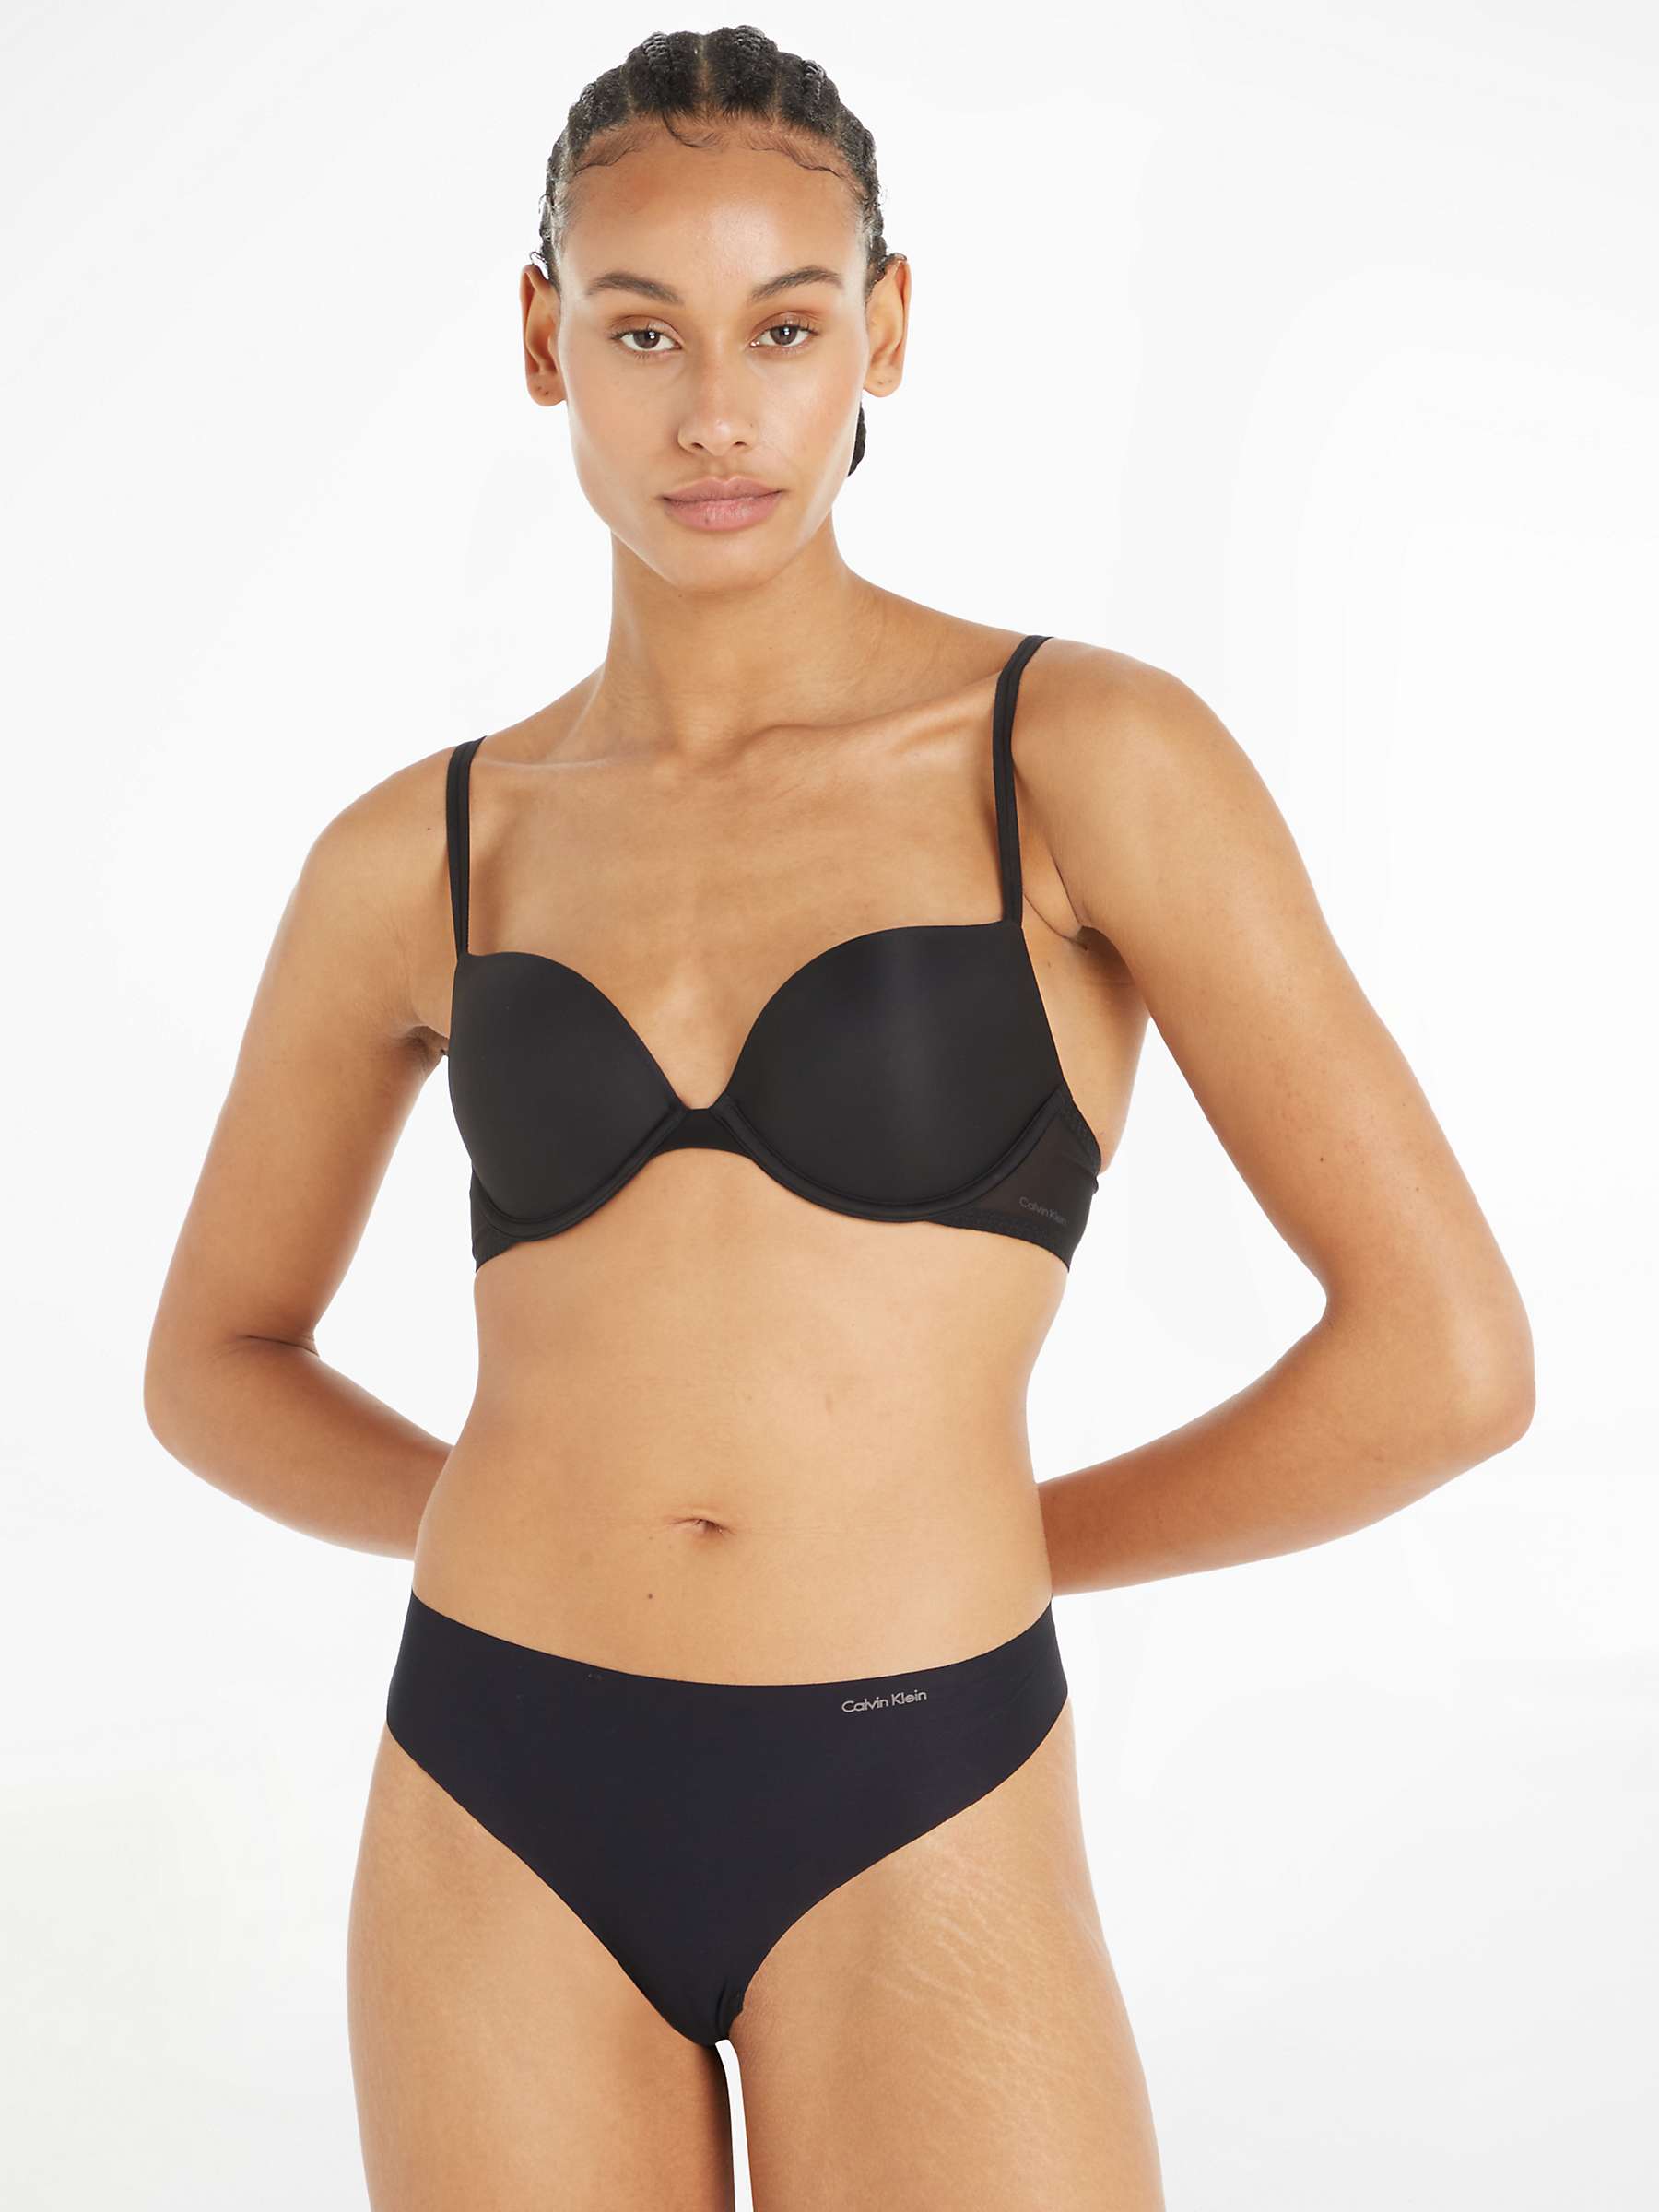 Buy Calvin Klein Invisibles Thong Online at johnlewis.com